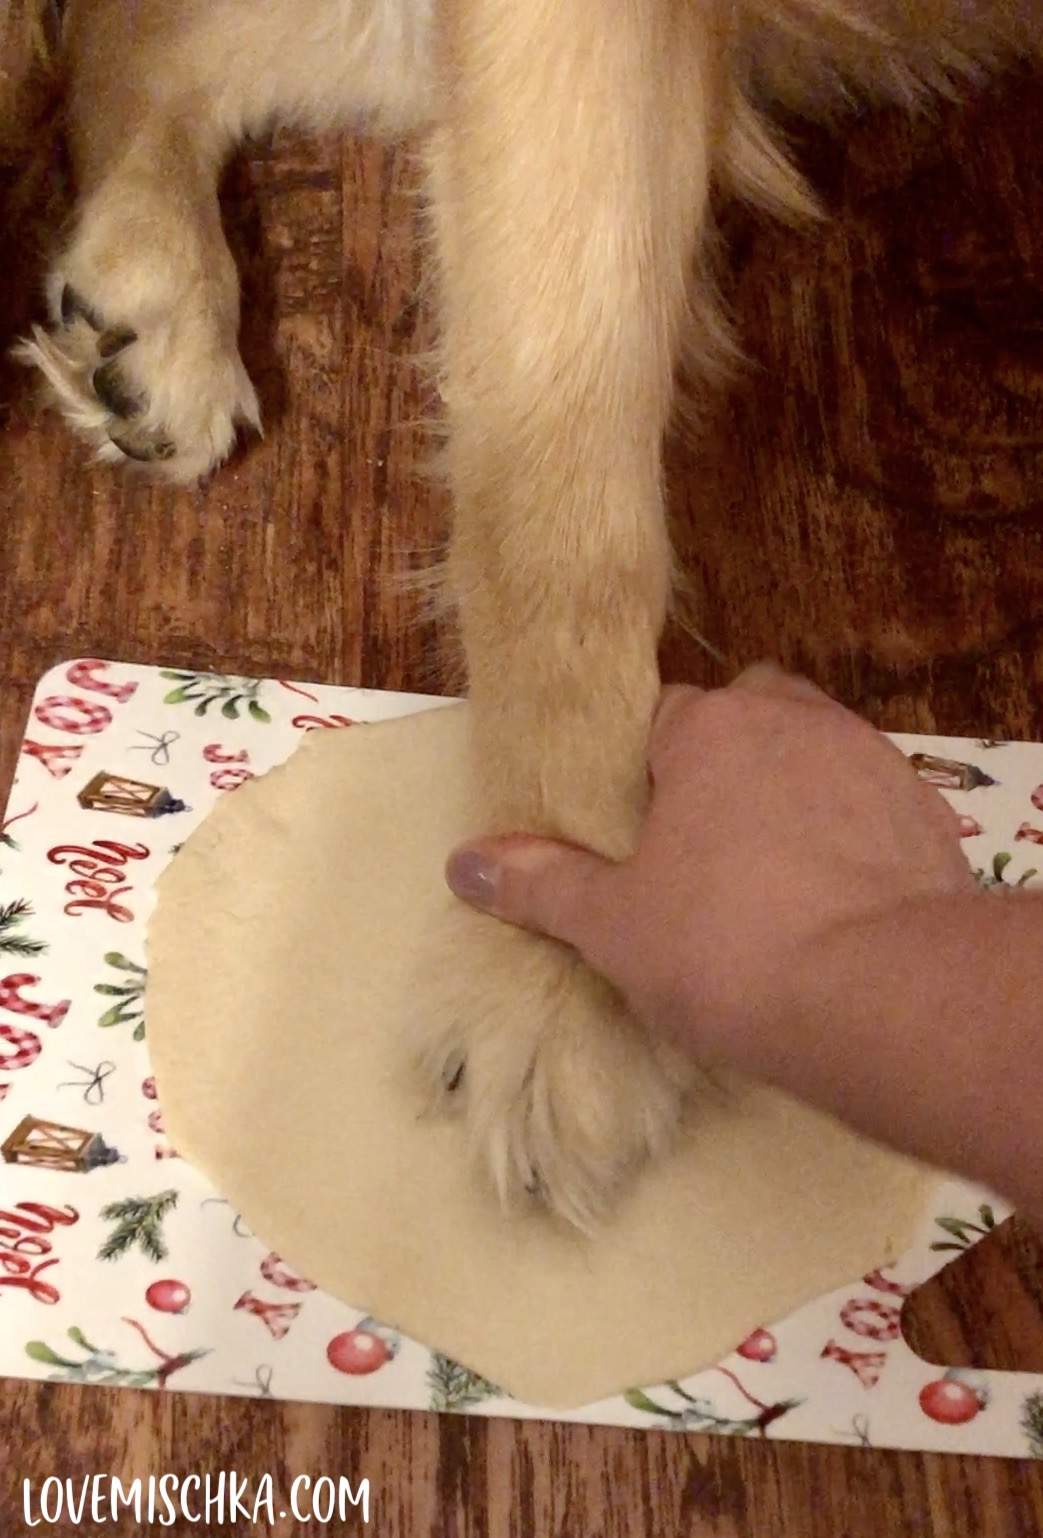 A golden retriever's paw is pressed into beige dough while making Paw Print Ornaments on a holiday-themed cutting board.